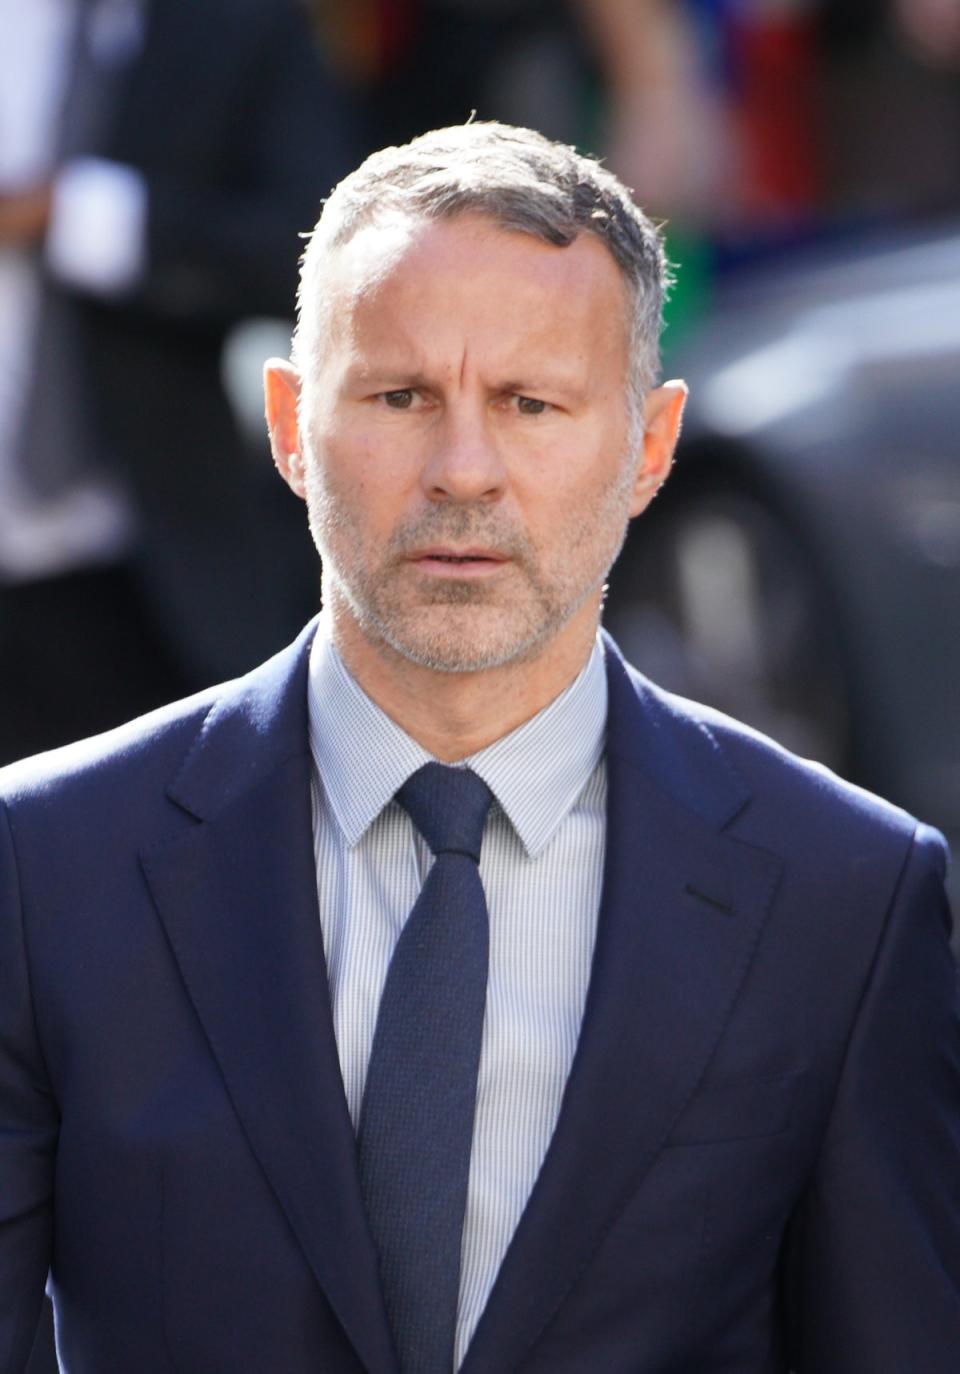 Former Manchester United footballer Ryan Giggs arrives at Manchester Crown Court (Peter Byrne/PA) (PA Wire)